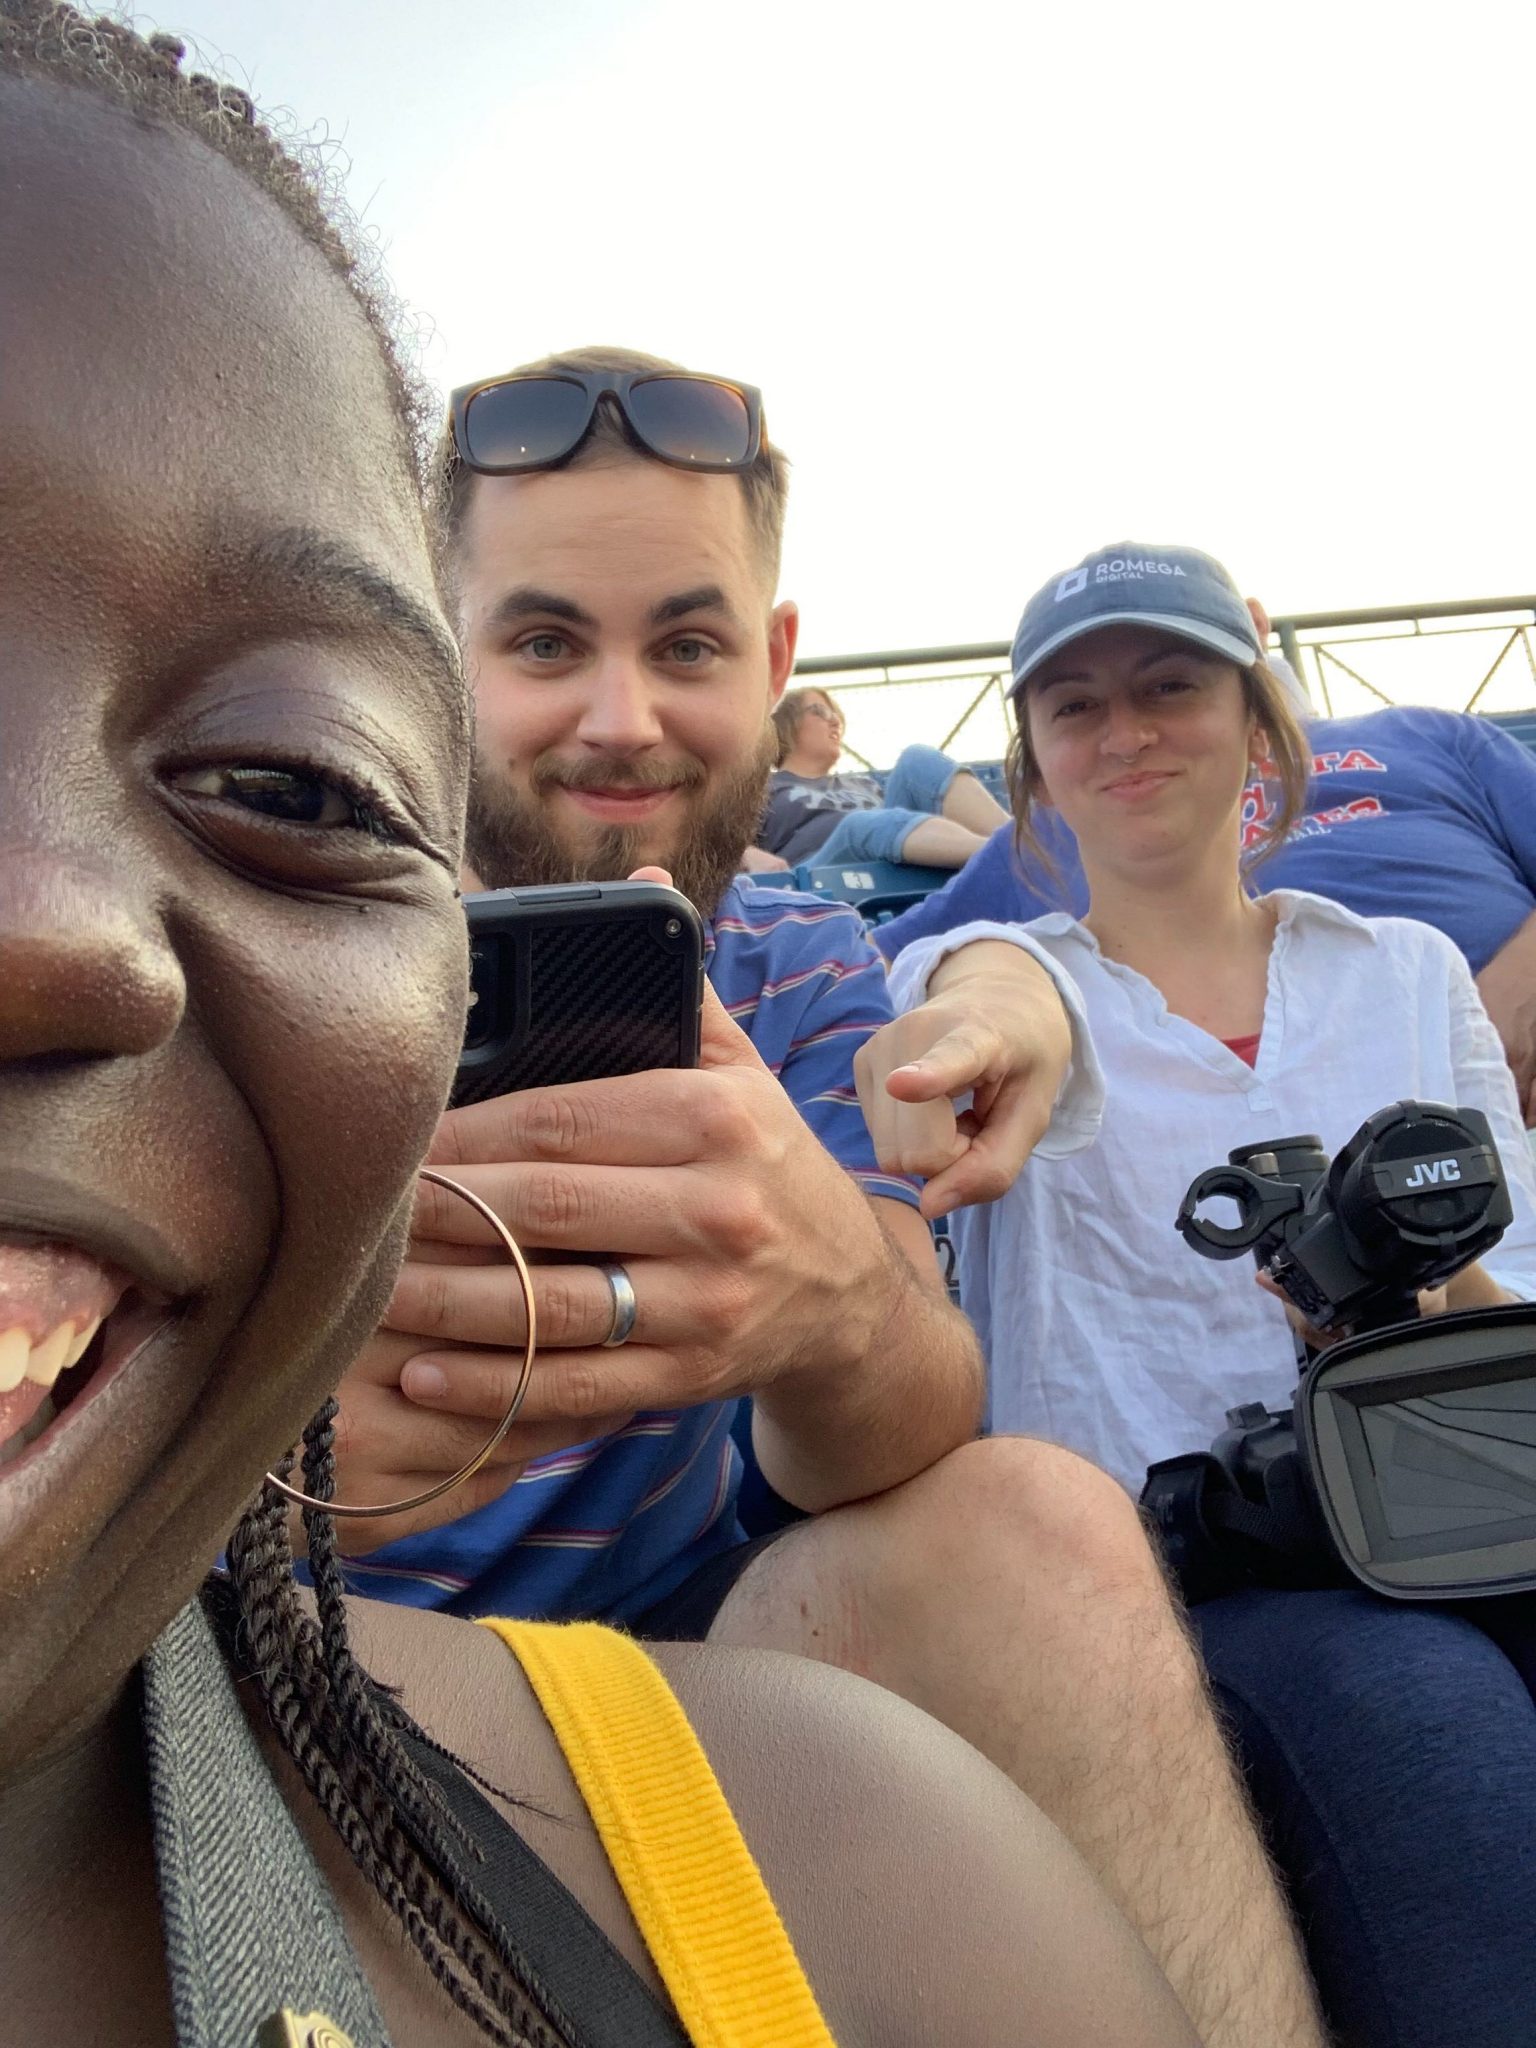 Two girls and a boy take a selfie in the stands at a baseball game.